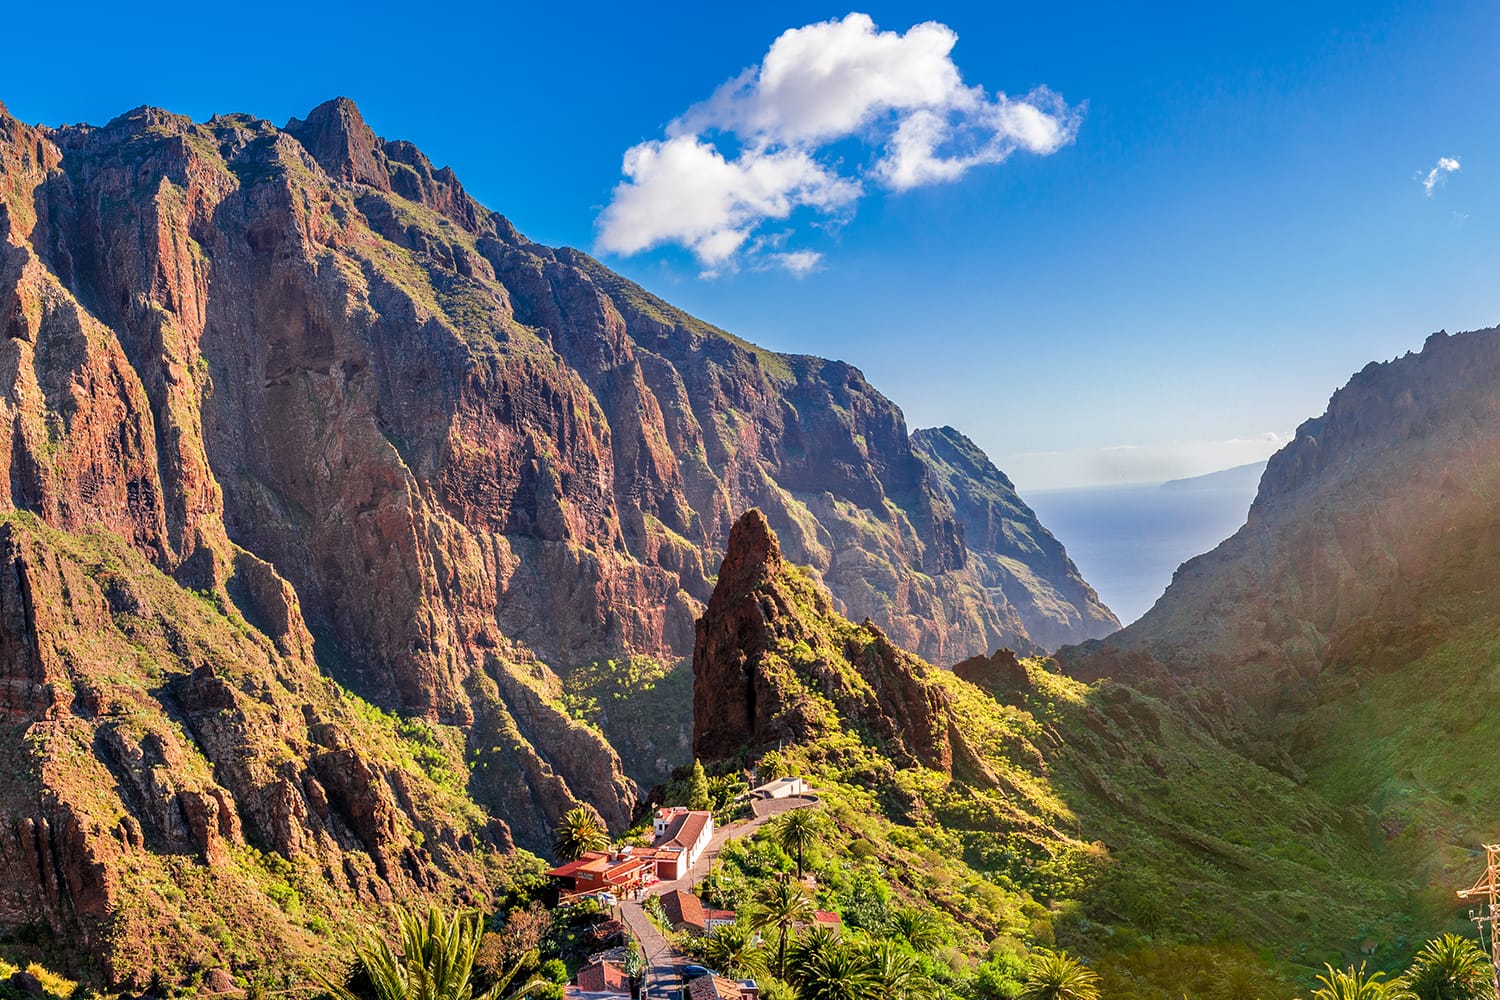 View of Masca village with palms and mountains, Tenerife, Canary islands, Spain